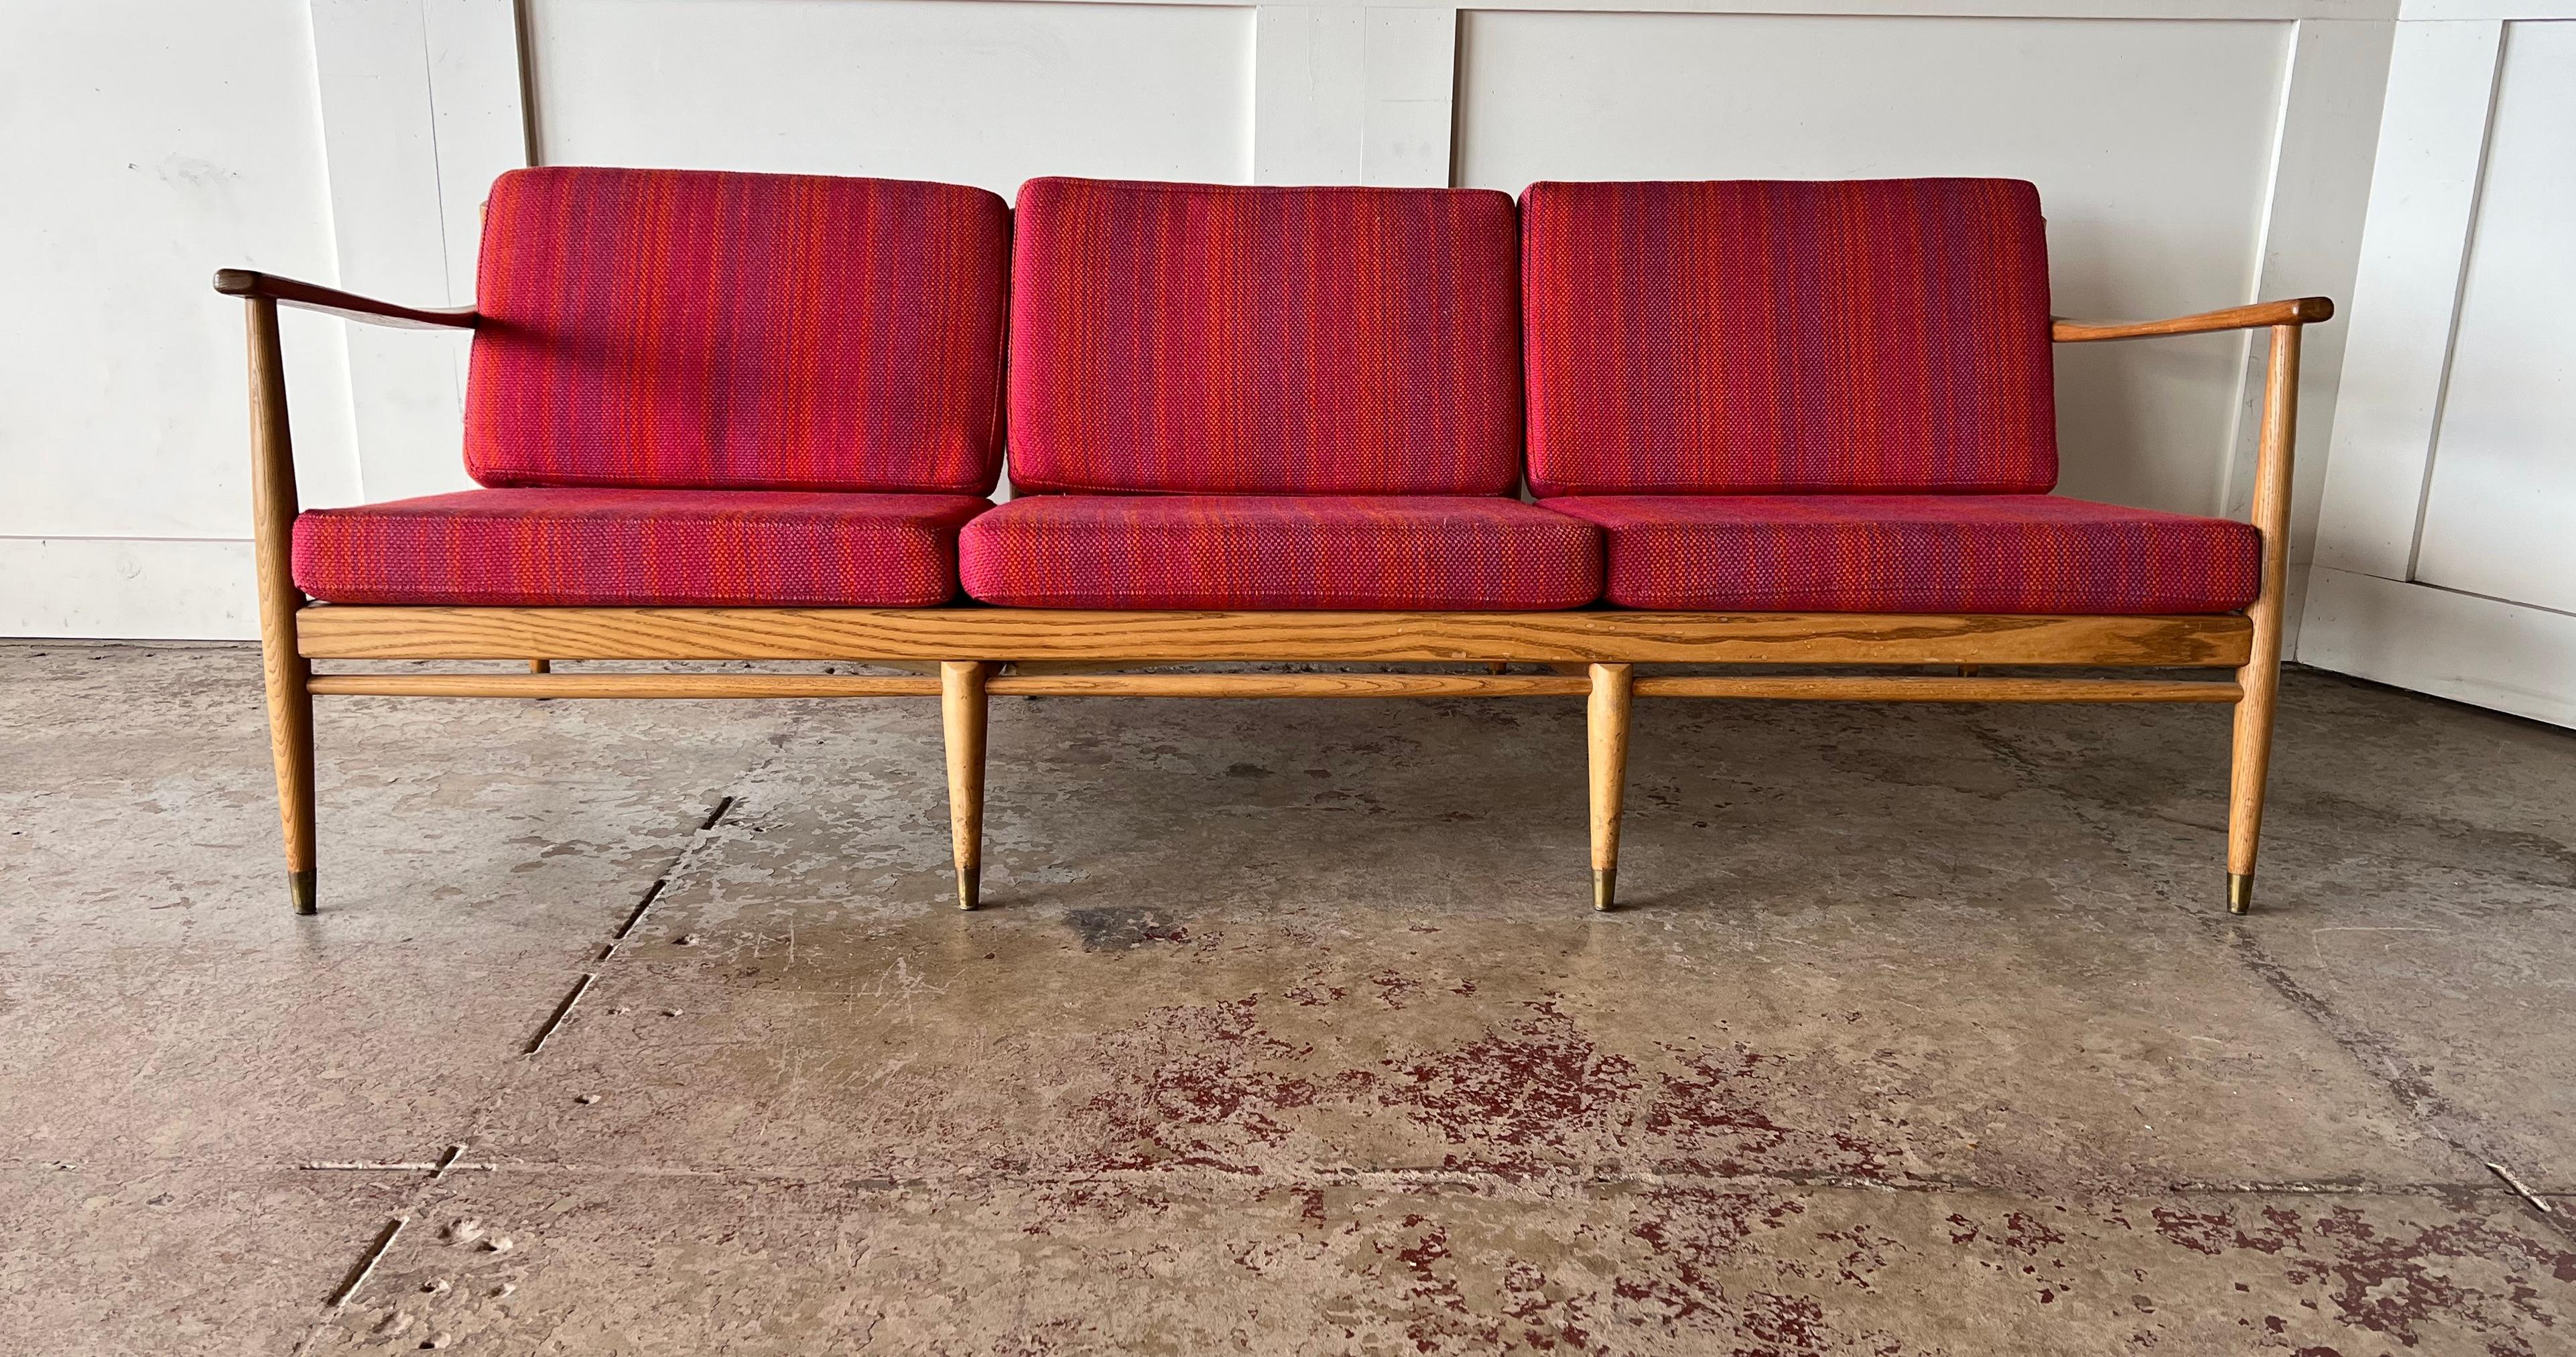 This three-seat sofa is a mid-century Danish design, inspired by the iconic style of Hans J. Wegner. The sofa features a cigar shape to the armrests and is upholstered in its original wool fabric. It is accented with a contrasting wide striped